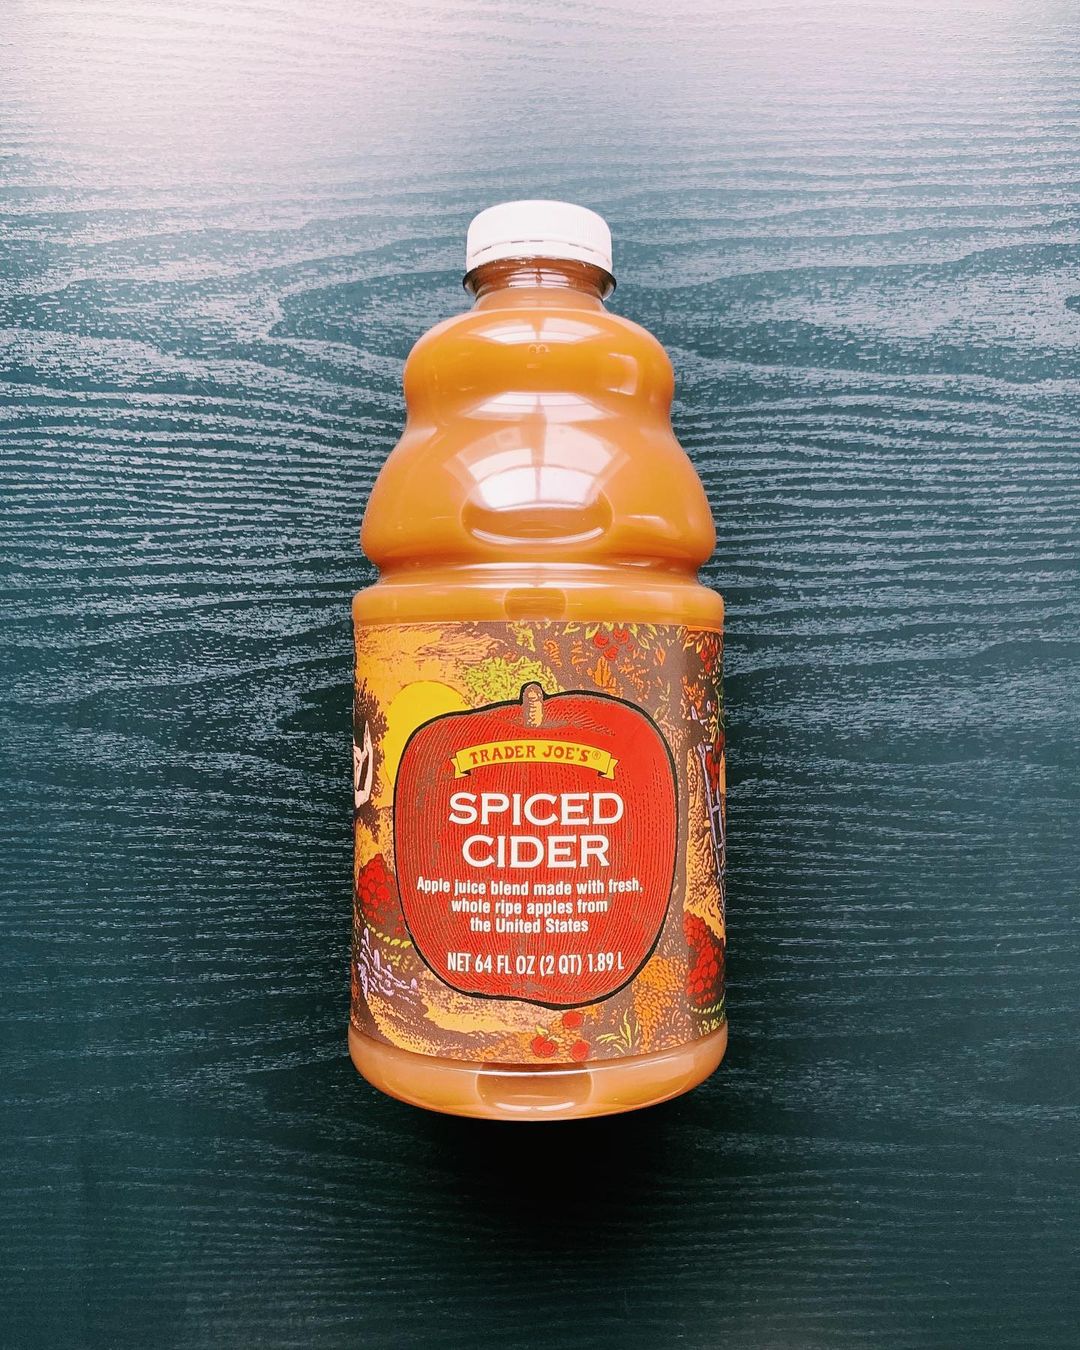 https://traderjoes.reviews/wp-content/uploads/2021/11/Spiced-Cider-1010-YAY-Another-fall.jpg